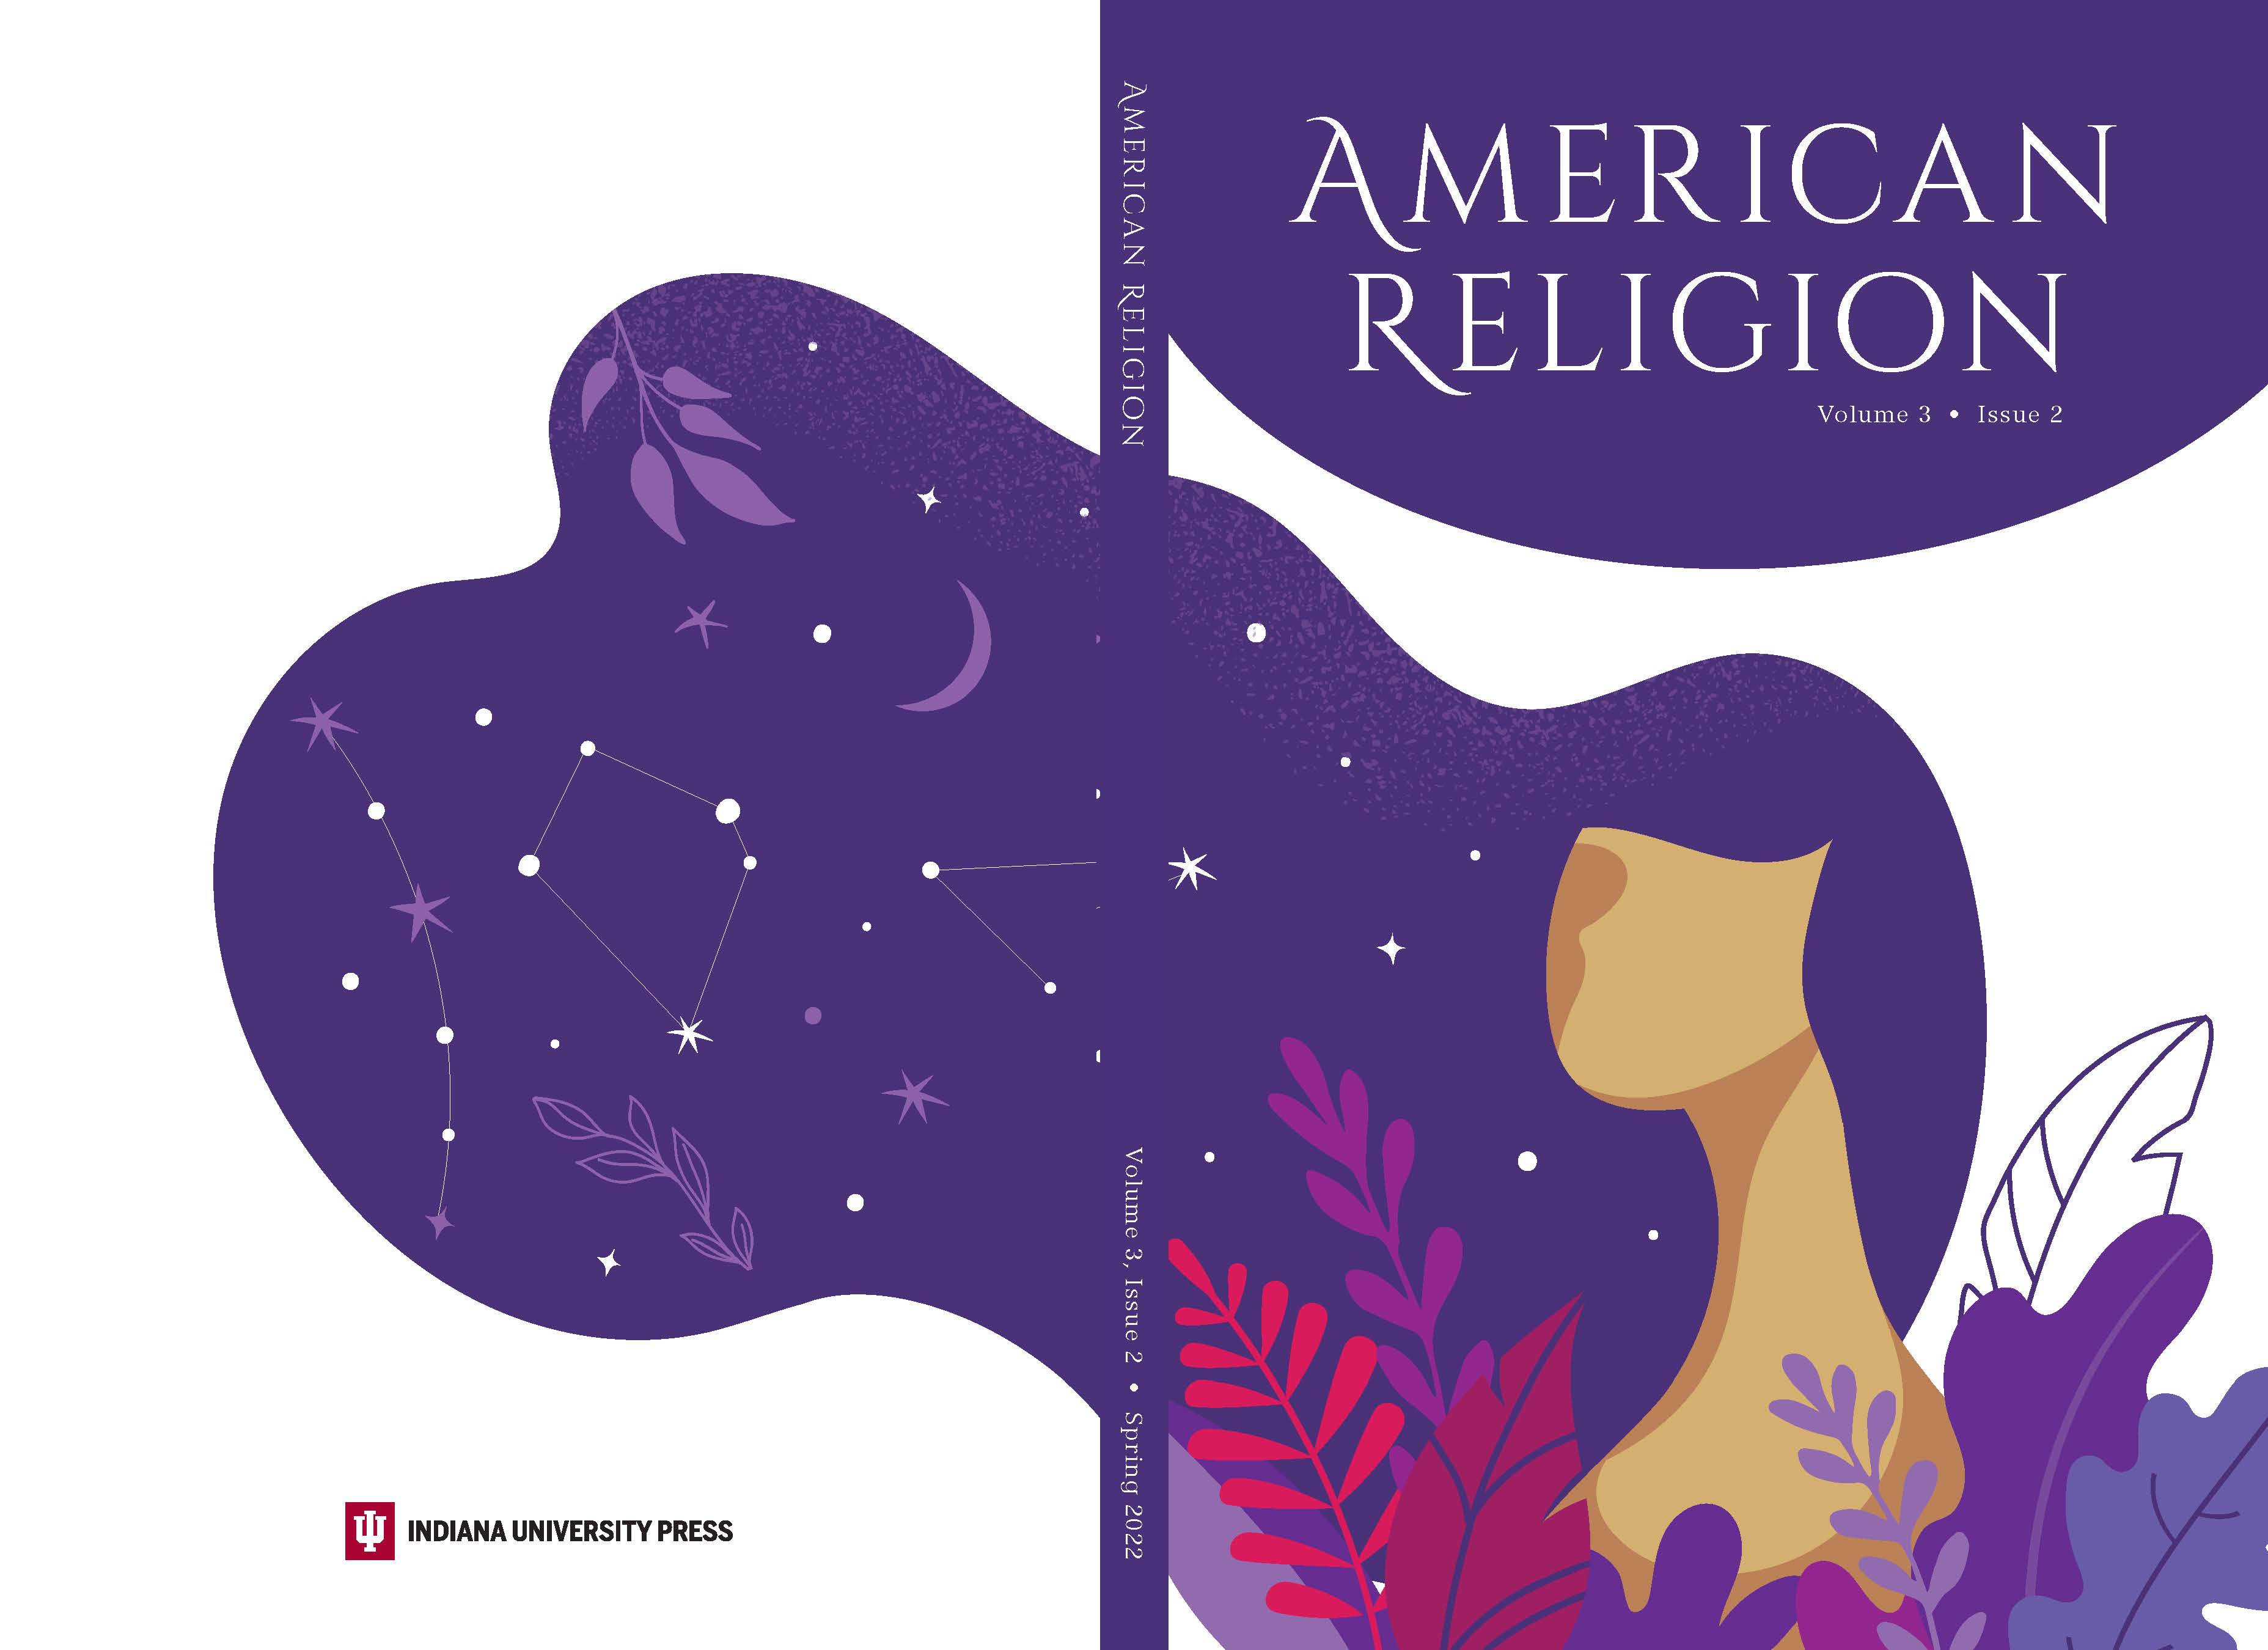 Cover of sixth issue of American Religion journal.